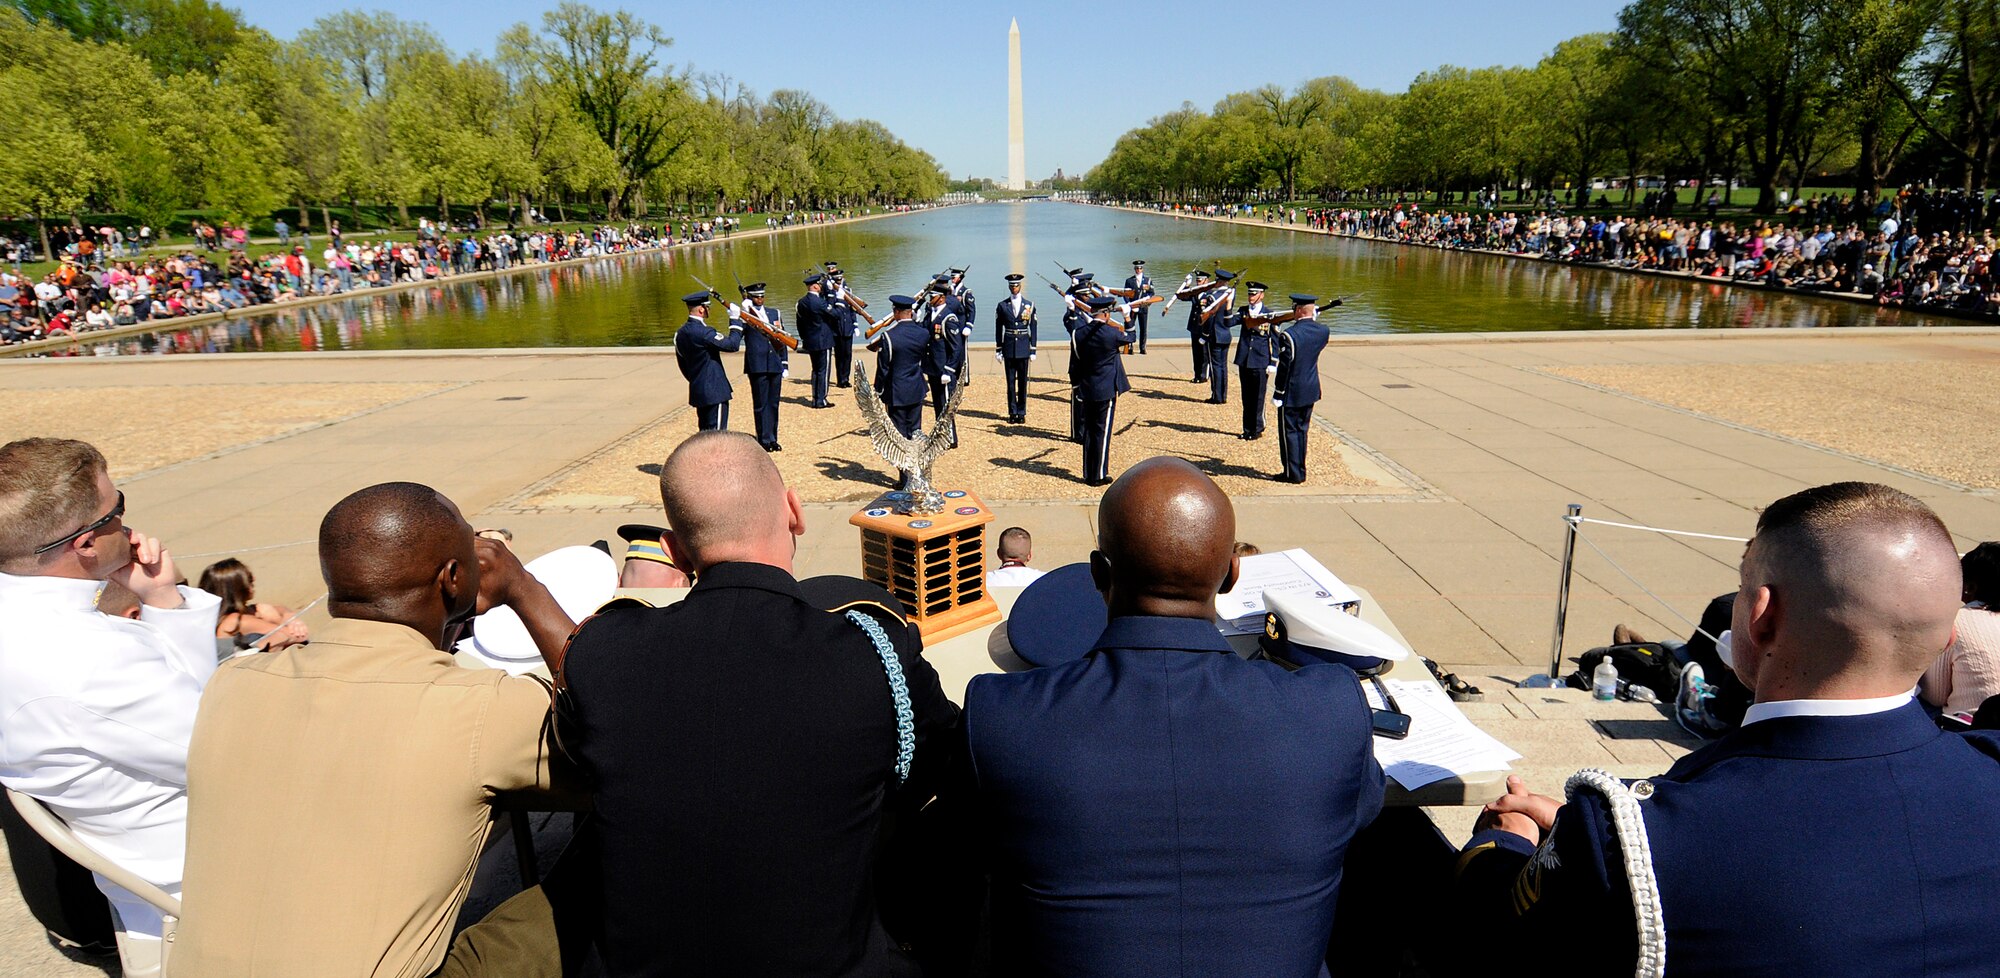 A panel of judges from the five U.S. military branches views a performance by the U.S. Air Force Honor Guard Drill Team during the 3rd Annual Joint Service Drill Team Exhibition April 10, 2010, at the Lincoln Memorial in Washington, D.C. The event featured drill team performances from all five military branches. (U.S. Air Force photo/Staff Sgt. Dan DeCook)